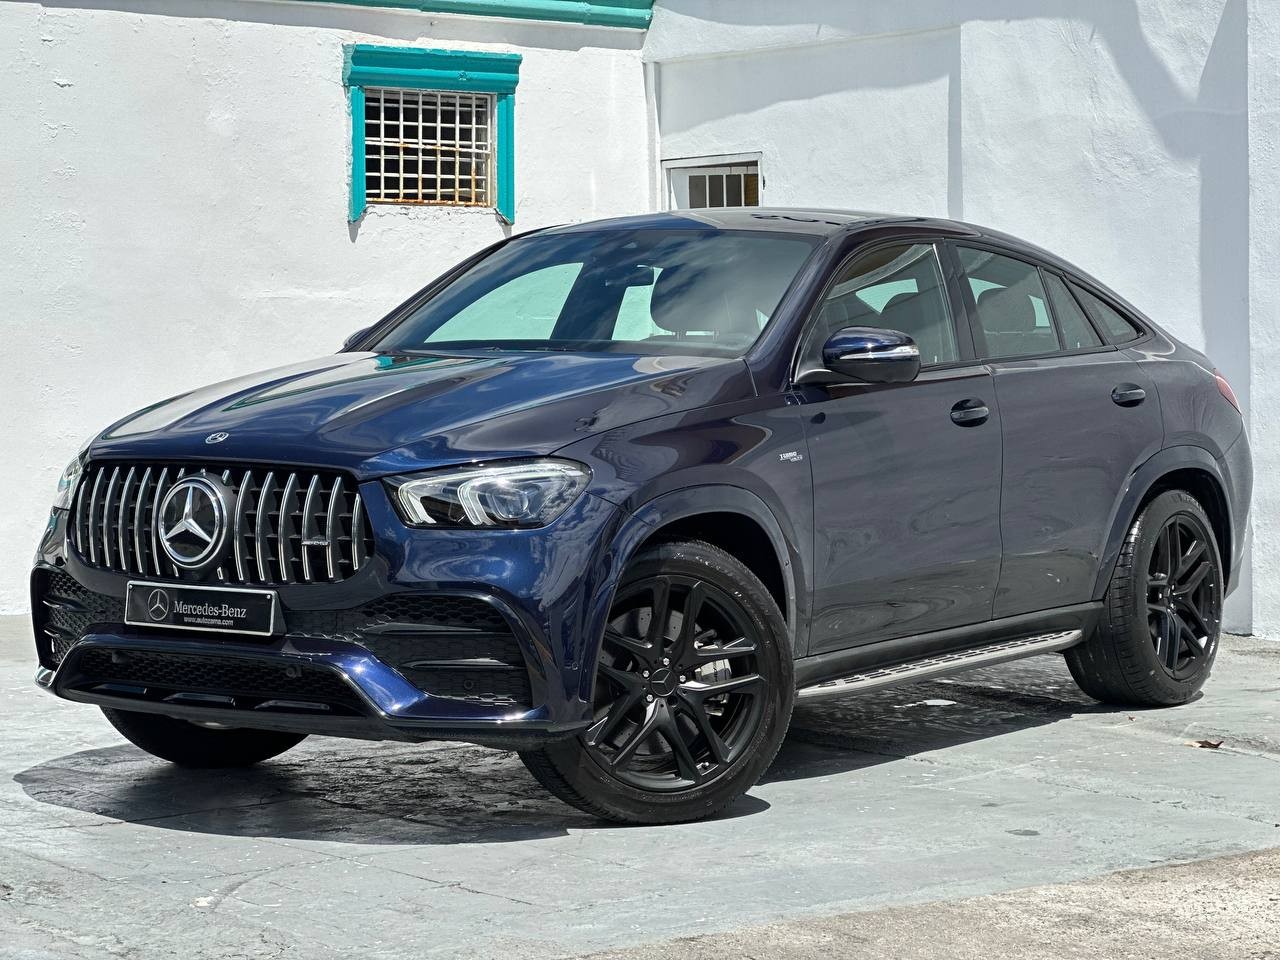 jeepetas y camionetas - MERCEDES-BENZ CLASE GLE 53 4MATIC COUPE 2020 8